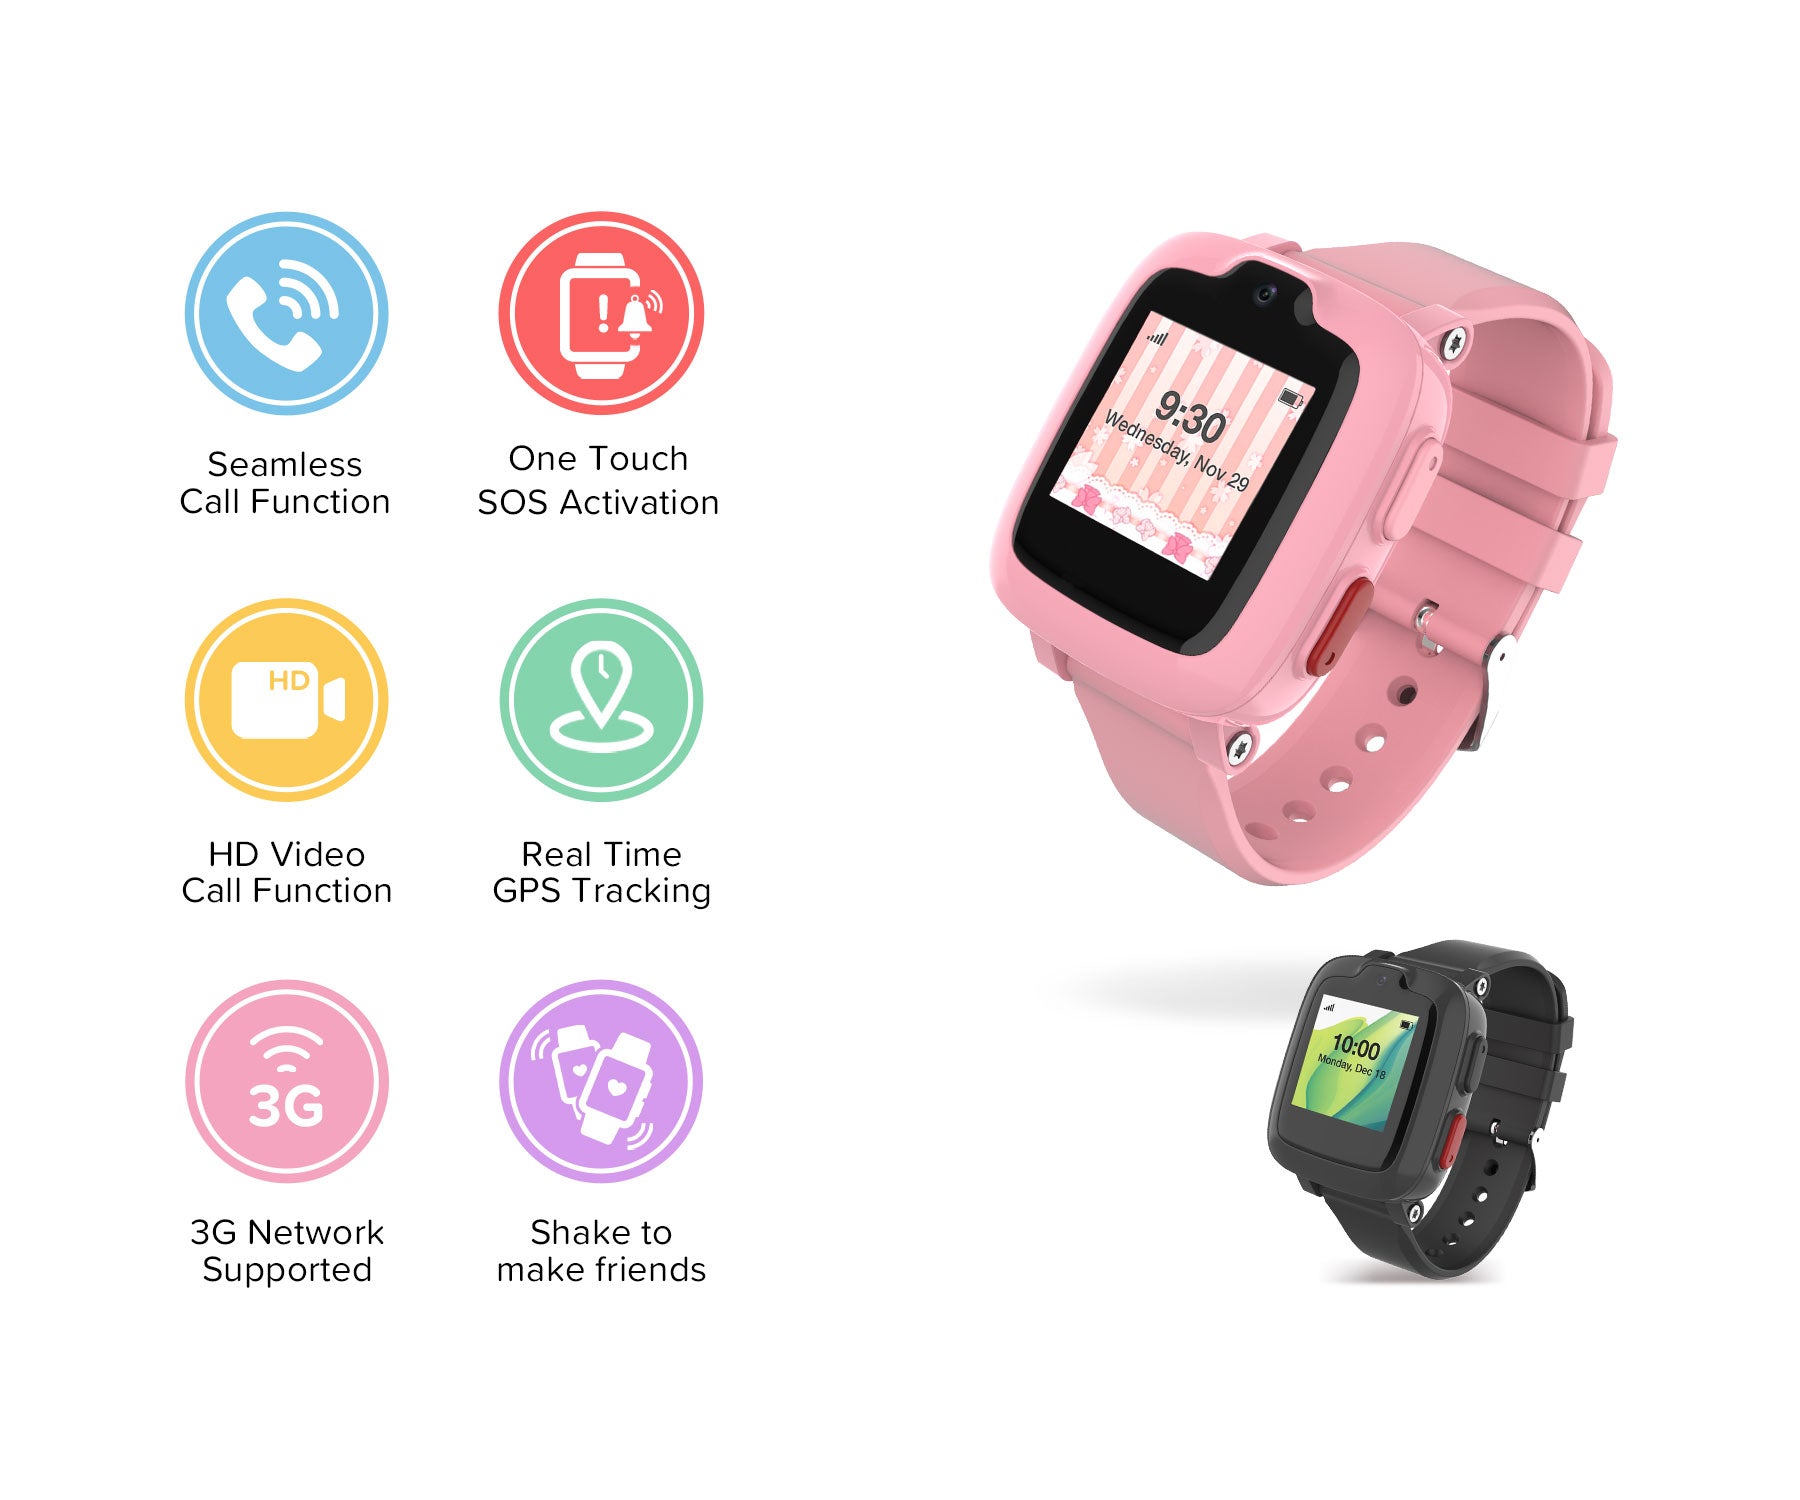 myFirst Fone S2 - Smart watch phone for kids with gps tracker